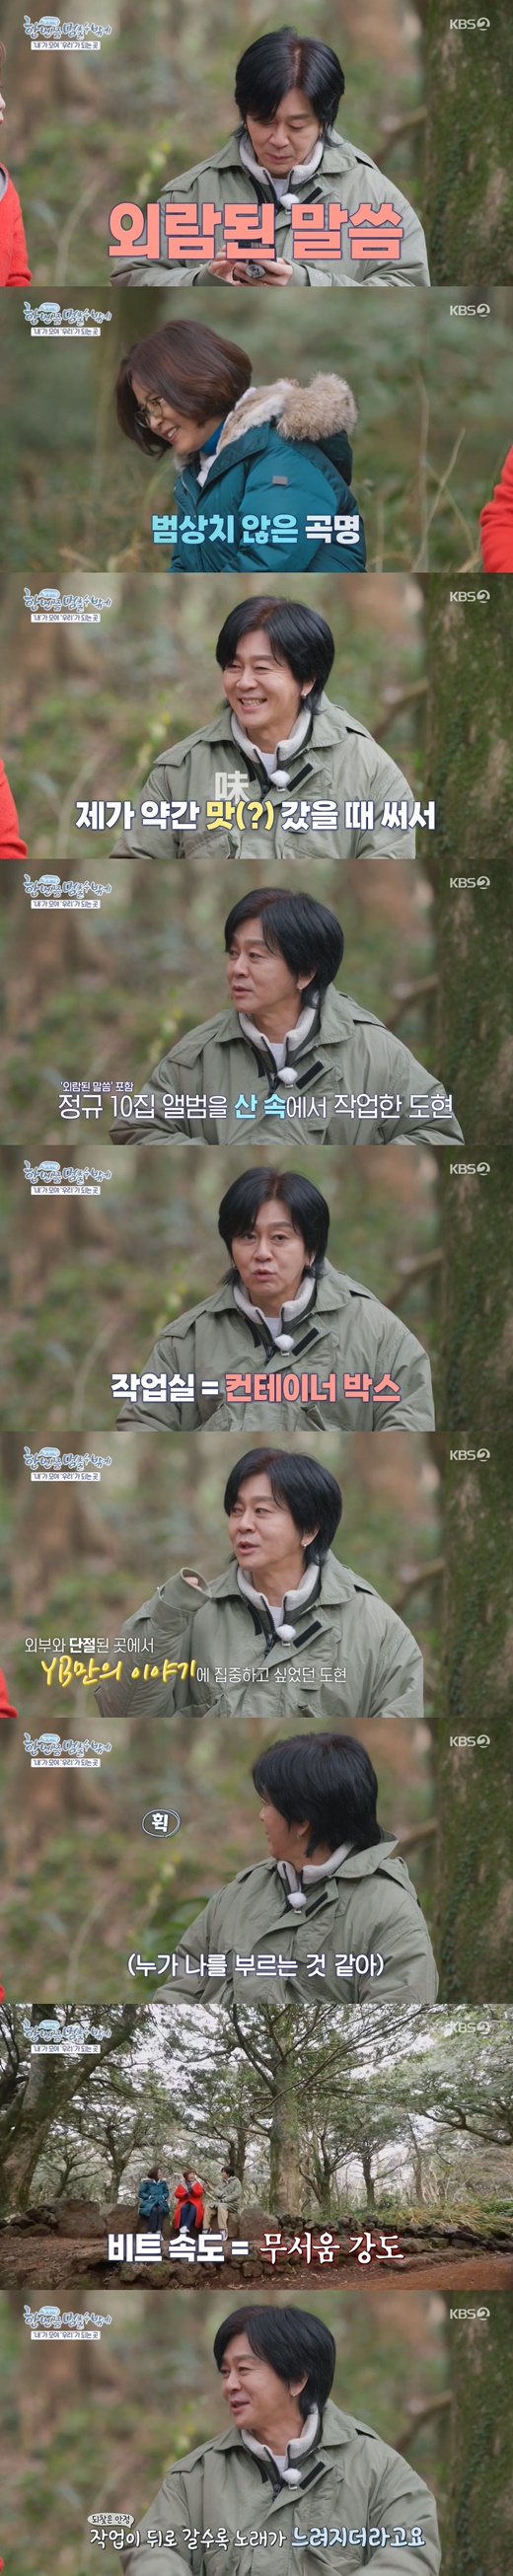 Yoon Do Hyun of the band YB revealed why he lived in the mountains.On KBS 2TV I have to stop once broadcast on the 3rd night, Lee Sun-hee, Lee Geum-hee, and Yoon Do Hyuns Jeju Island trip were drawn.On the day, the three of them walked through the Vijarim (Visa Tree Forest) and talked. Lee Sun-hee was emotional and asked them to play the song, saying, I would like Dohyeon to listen to music here.Yoon Do Hyun introduced the title as extraordinary words by playing music on his cell phone.If you look at those who speak, the stories behind I am lonely, are always uncomfortable, and there are many animals in the lyrics, said Yoon Do Hyun.The song The Outlooked Word was developed with a fast and strong beat.As a cat dances, like a Sharalala/Lizard running/Its no use looking at me with a blind eye/ Its no use feeding a hungry lion/Its no use with a loud speech of admiration, and other lyrics caught my eye.I wrote it when I was a little bit tasty, Yoon Do Hyun added, laughing.The band YB released their regular 10th album, Twilight State, in 2019.He said, Most of the 10 regular houses were written in the mountains and written in the mountains.Yoon Do Hyun said, I built a container box on the mountain and created a residential environment and workshop. I wanted to write a song because I was isolated.When I bump into people, I listen to their stories and reflect them. I wanted to write my story. It may be a funny story, but when I go into the mountain alone, it is scary. I work without knowing it, and the beat gets faster.Later, the song slowed down as I went back. He added Lee Sun-hee and Lee Geum-hee.Yoon Do Hyun has been with YB members for a long time since 1997.YB is a band that can do new things, and when I do new things, I fight a lot, he said. I fought a lot when I made Its energy, though, as its been, and its been so long since Ive been more honest and hurtful, but its more energy.Lee Sun-hee said, If there is a team, I am envious of the fact that there is basically a pile of internal work. I work alone, so I feel like starting from the beginning with a new person.